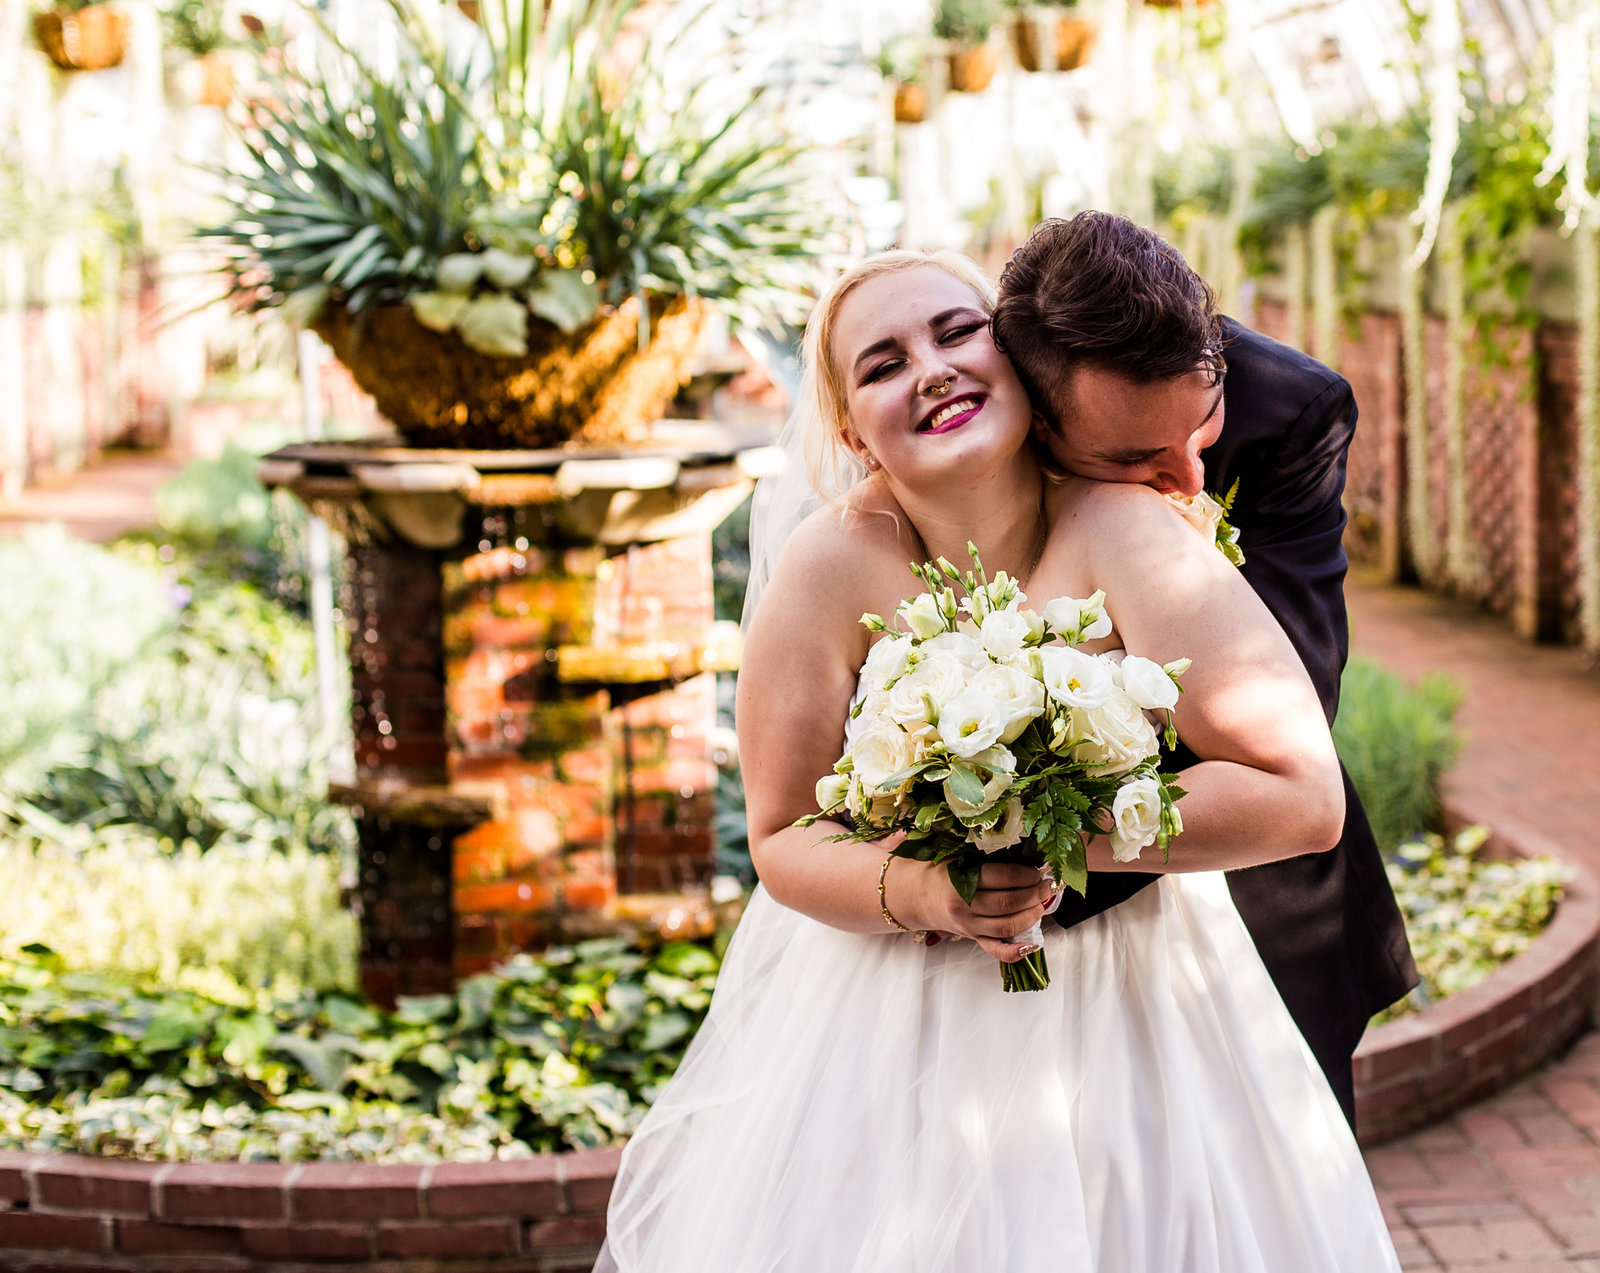 Groom embraces bride after their wedding in the Broderie Room of Phipps Conservatory